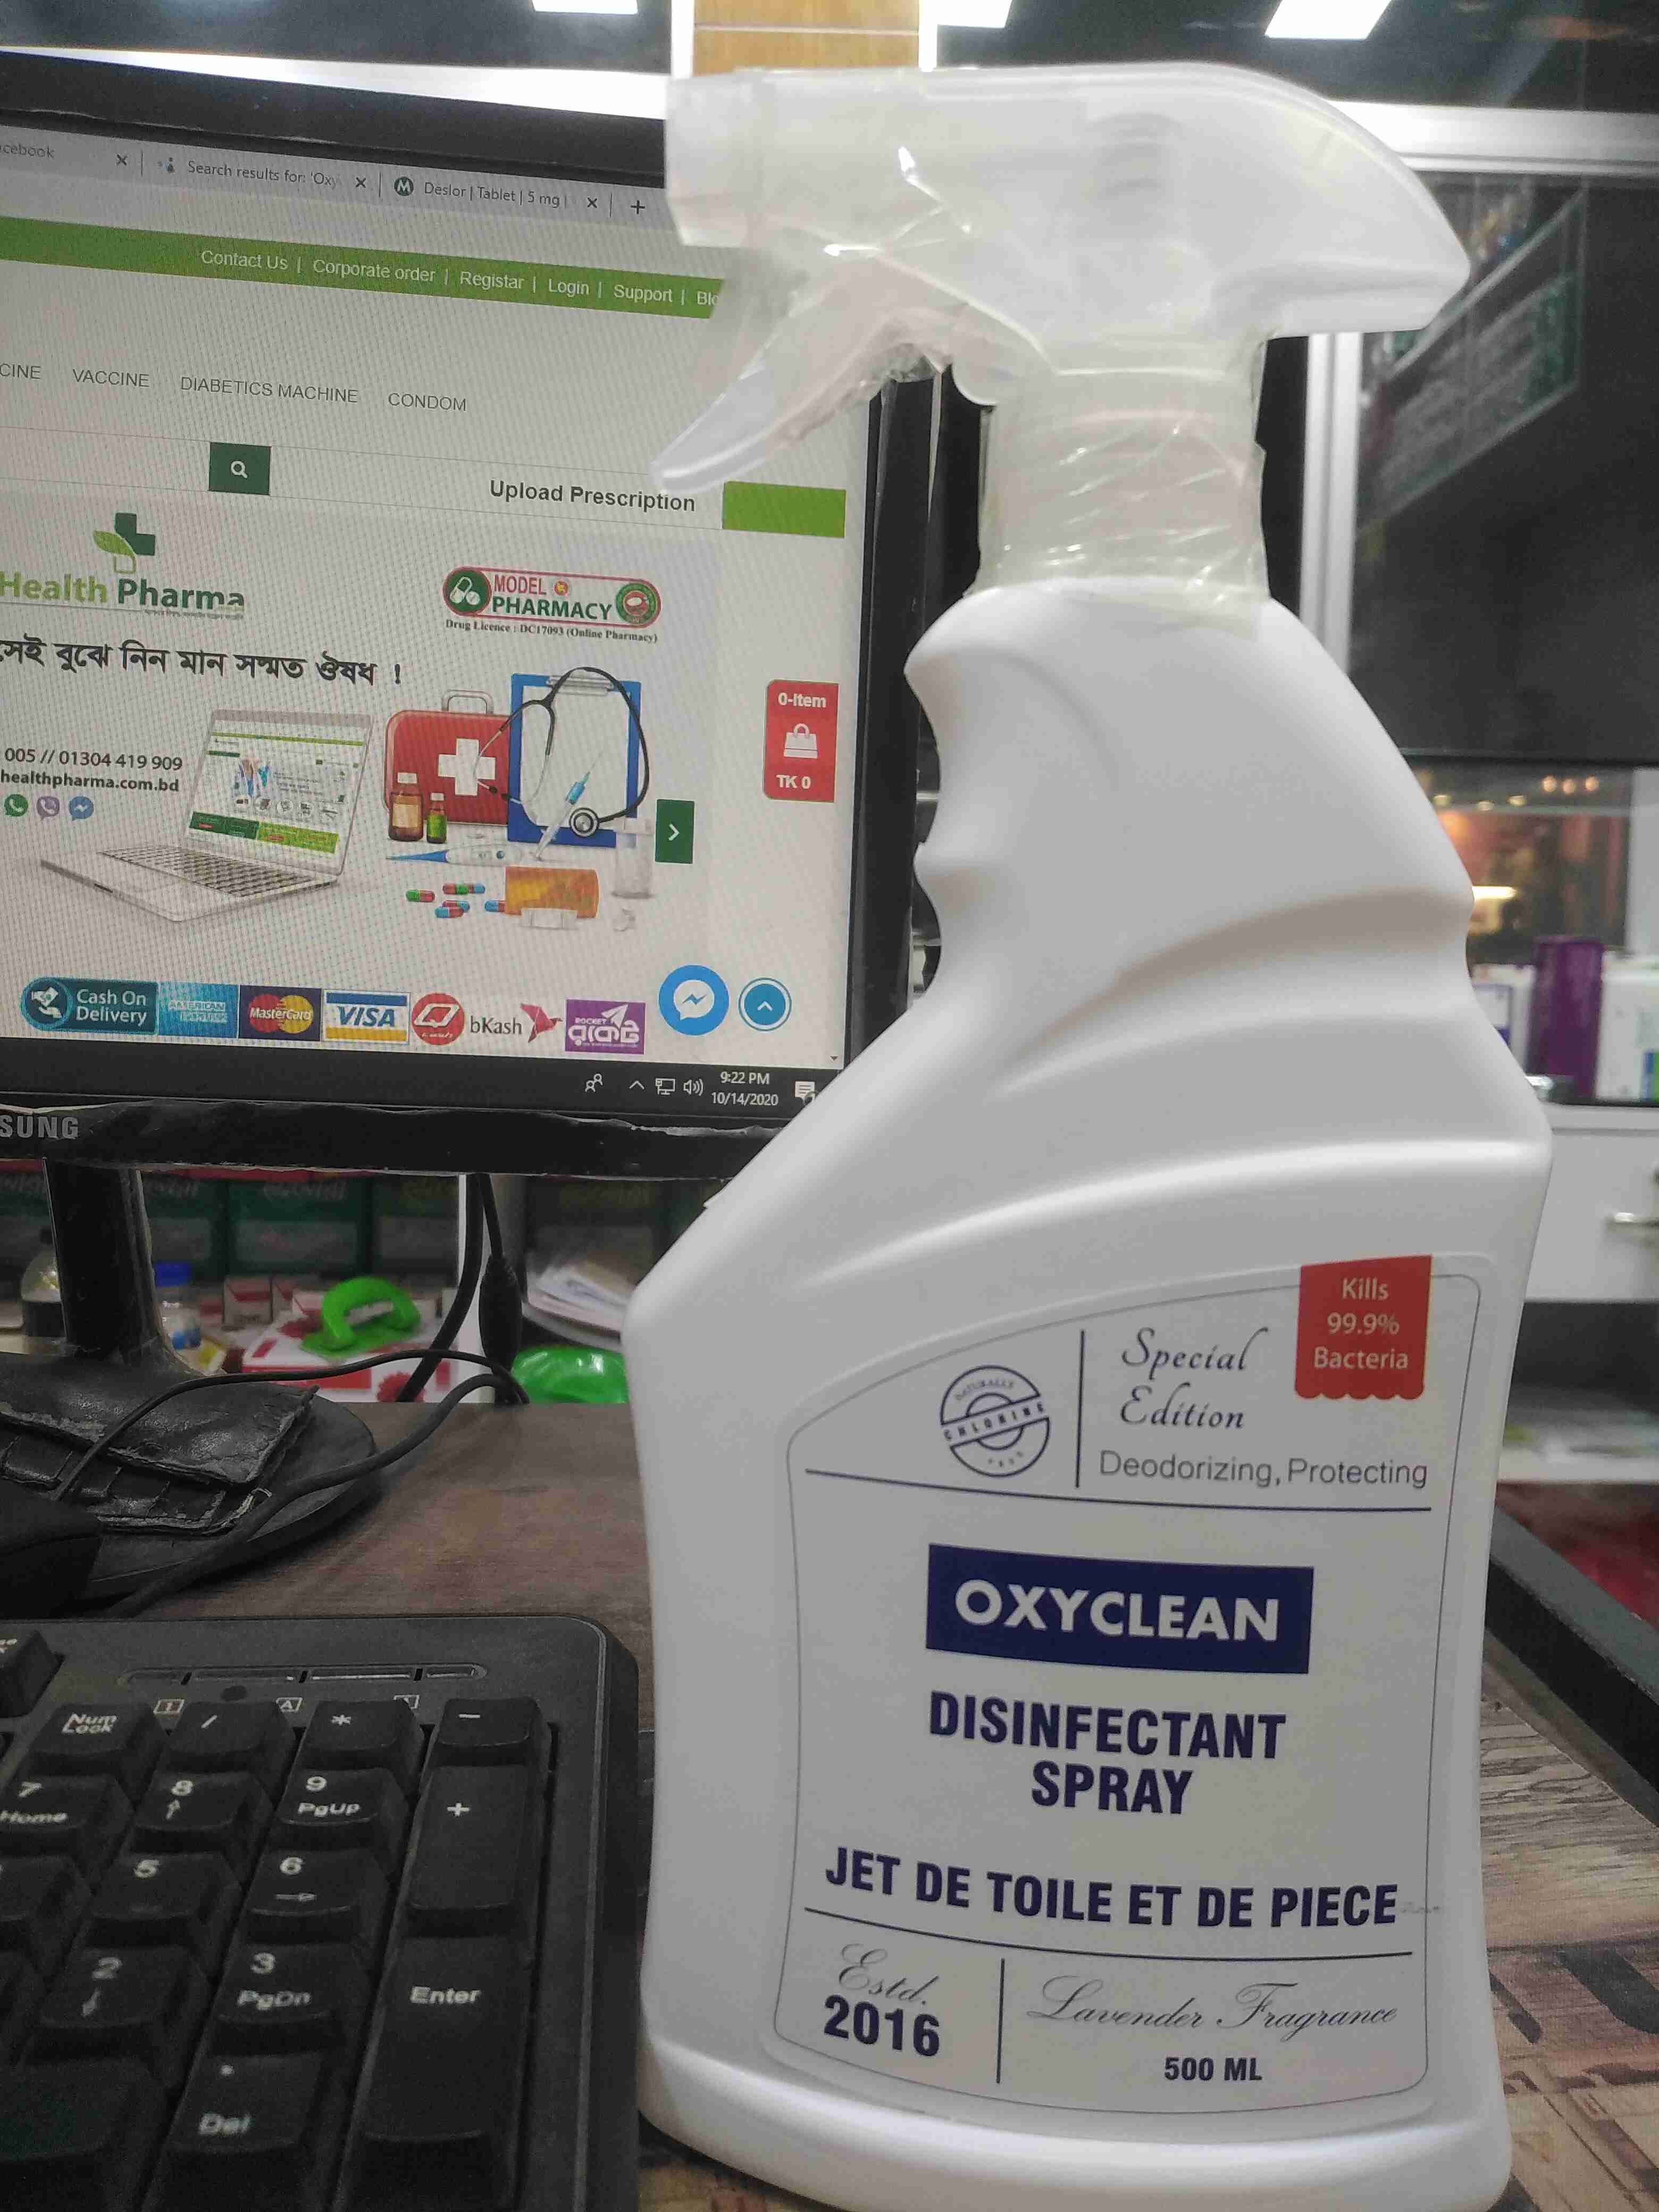 Oxyclean Disinfectant Spray